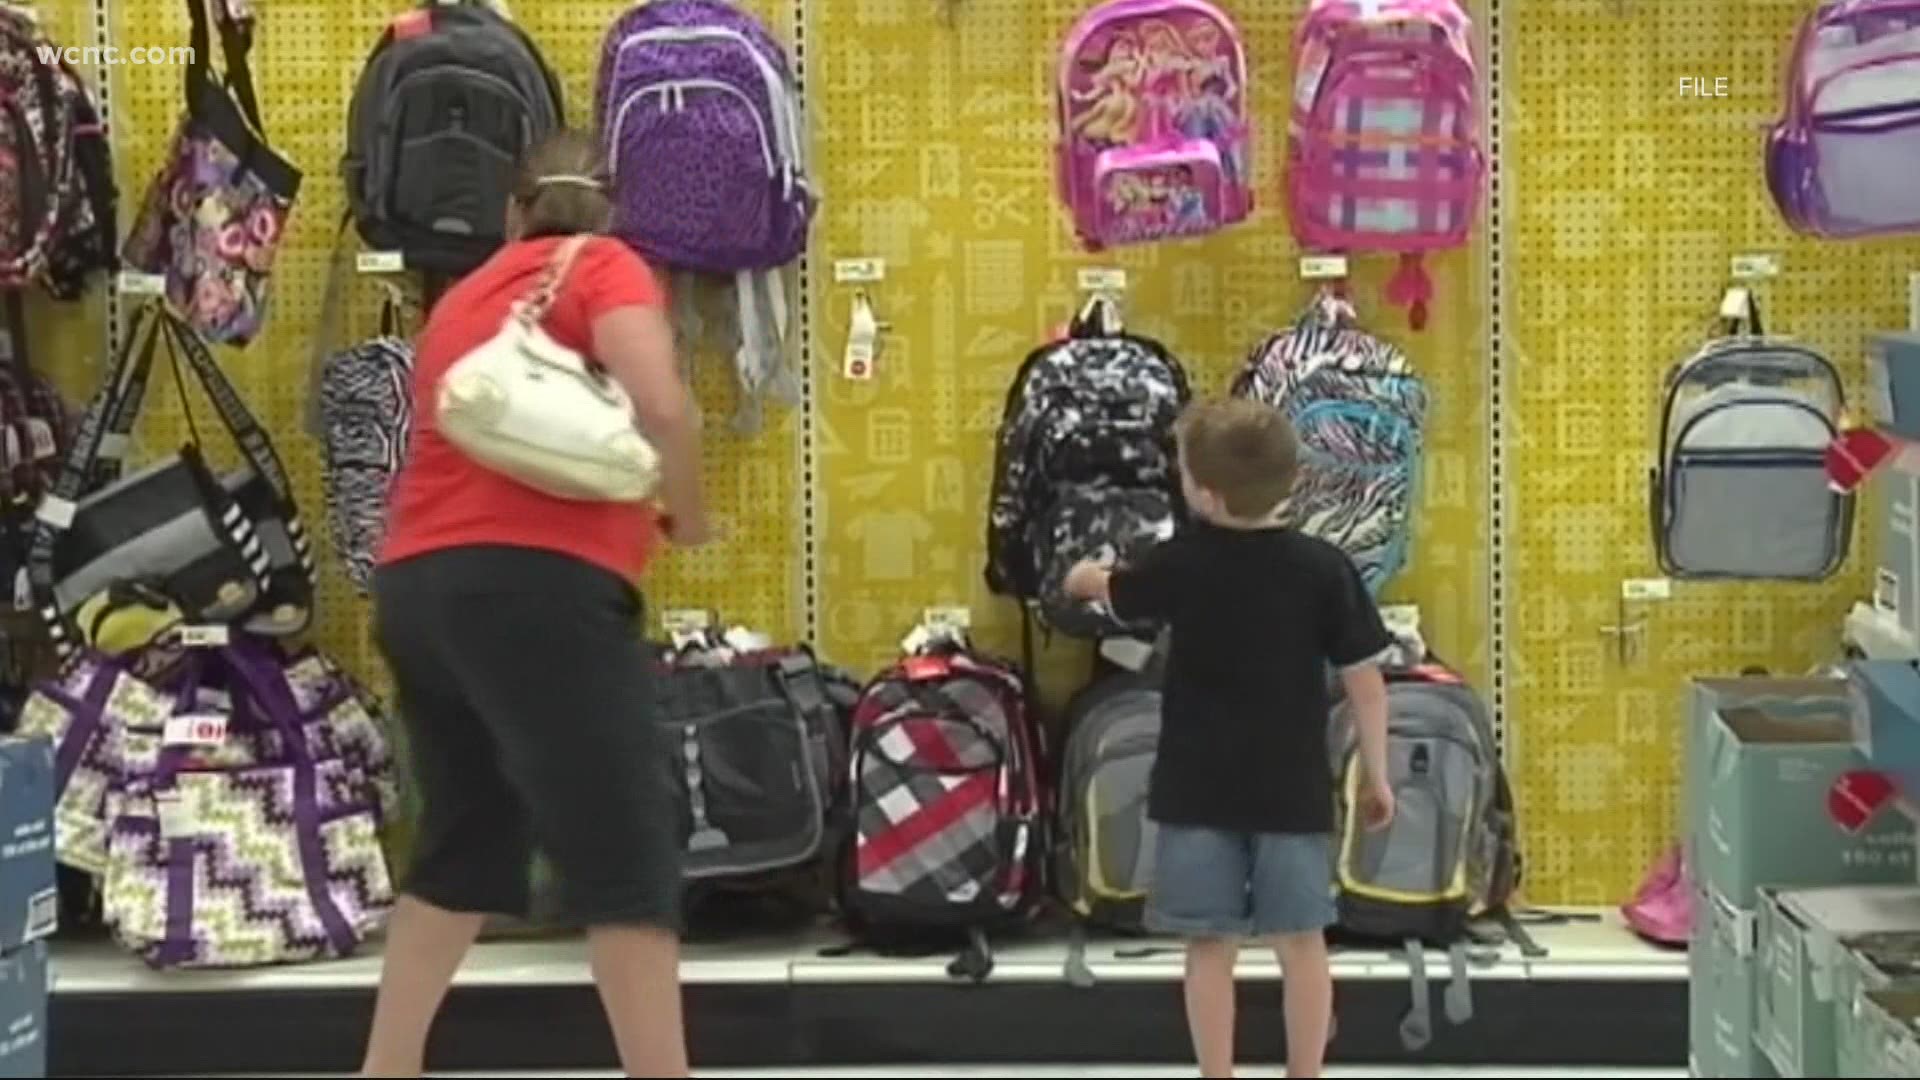 School supplies may be harder than usual to find this year.